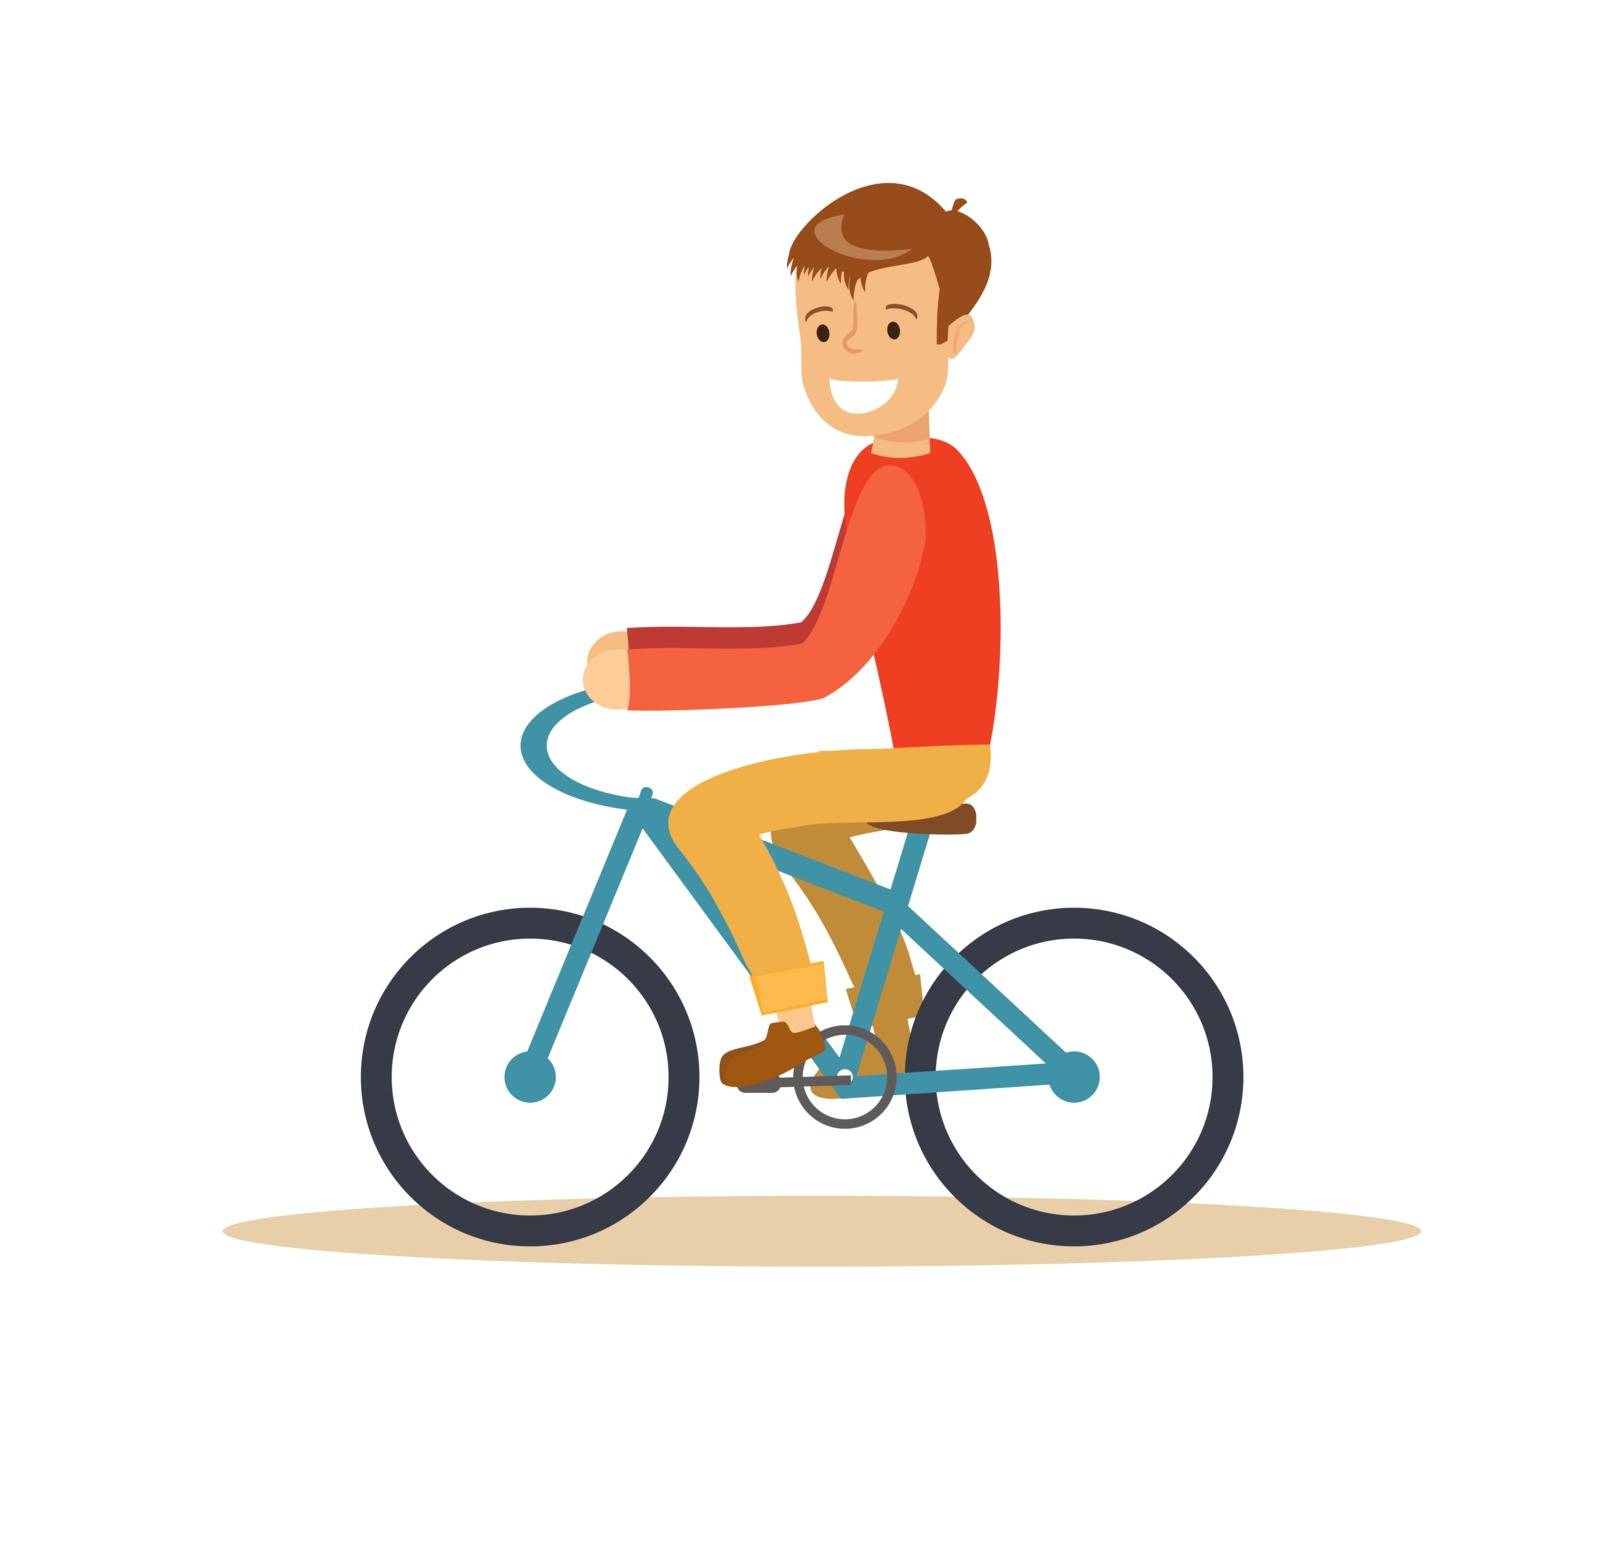 Illustration of a young boy riding a bicycle by alekseiveprev